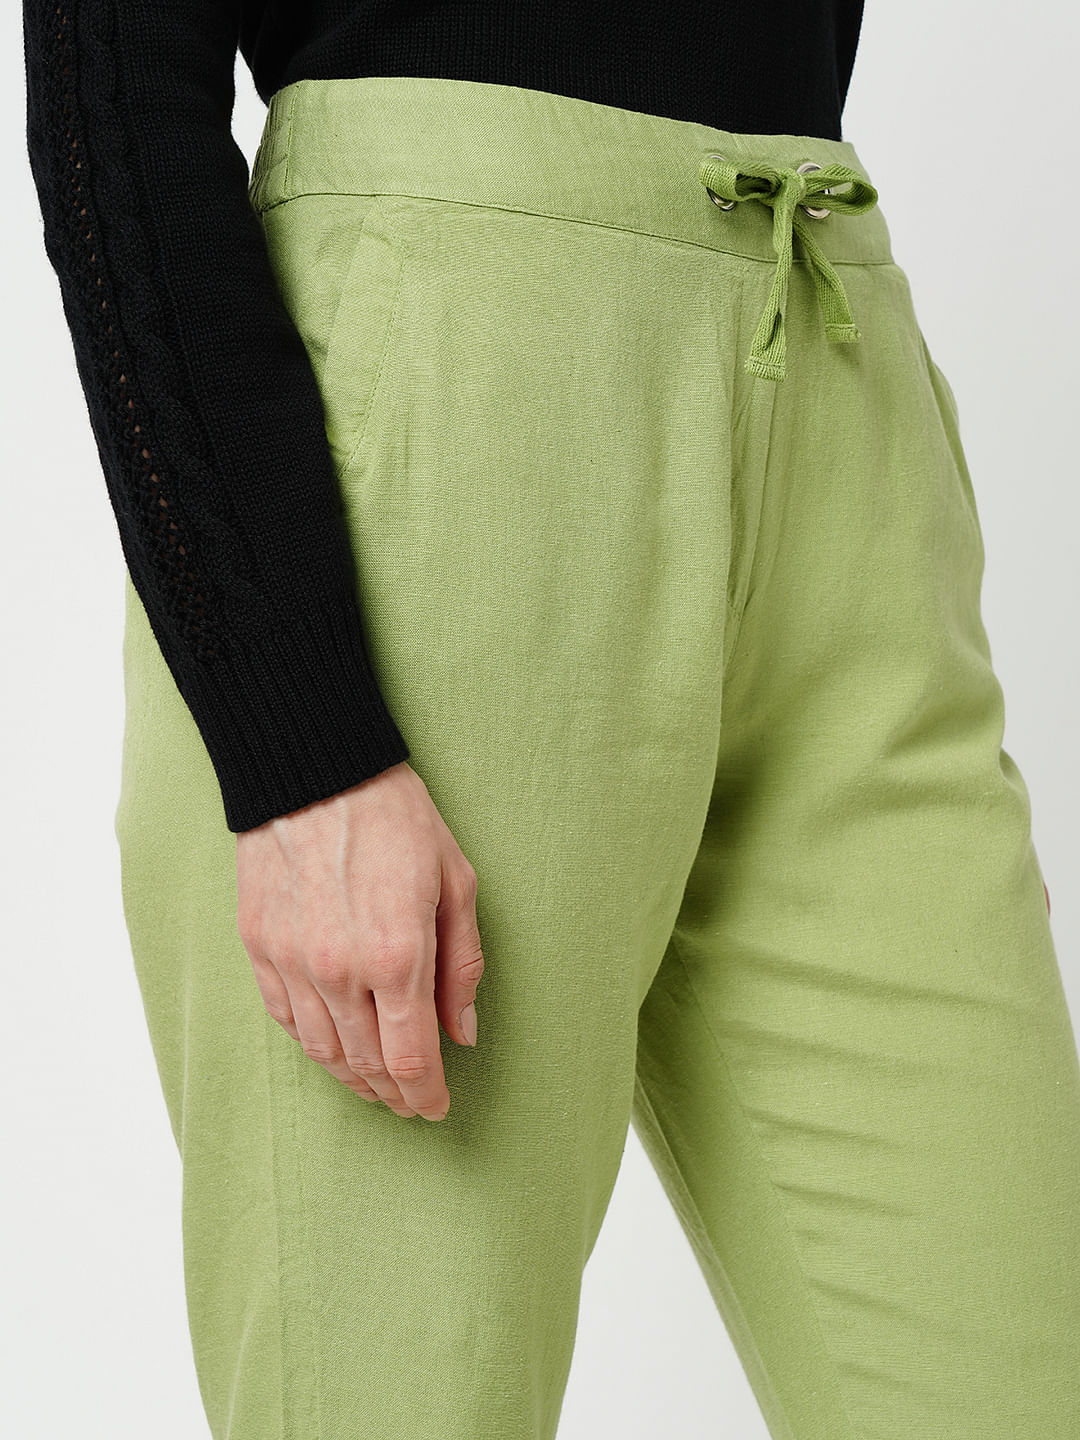 High-waisted tailored trousers - Neon green - Ladies | H&M IN